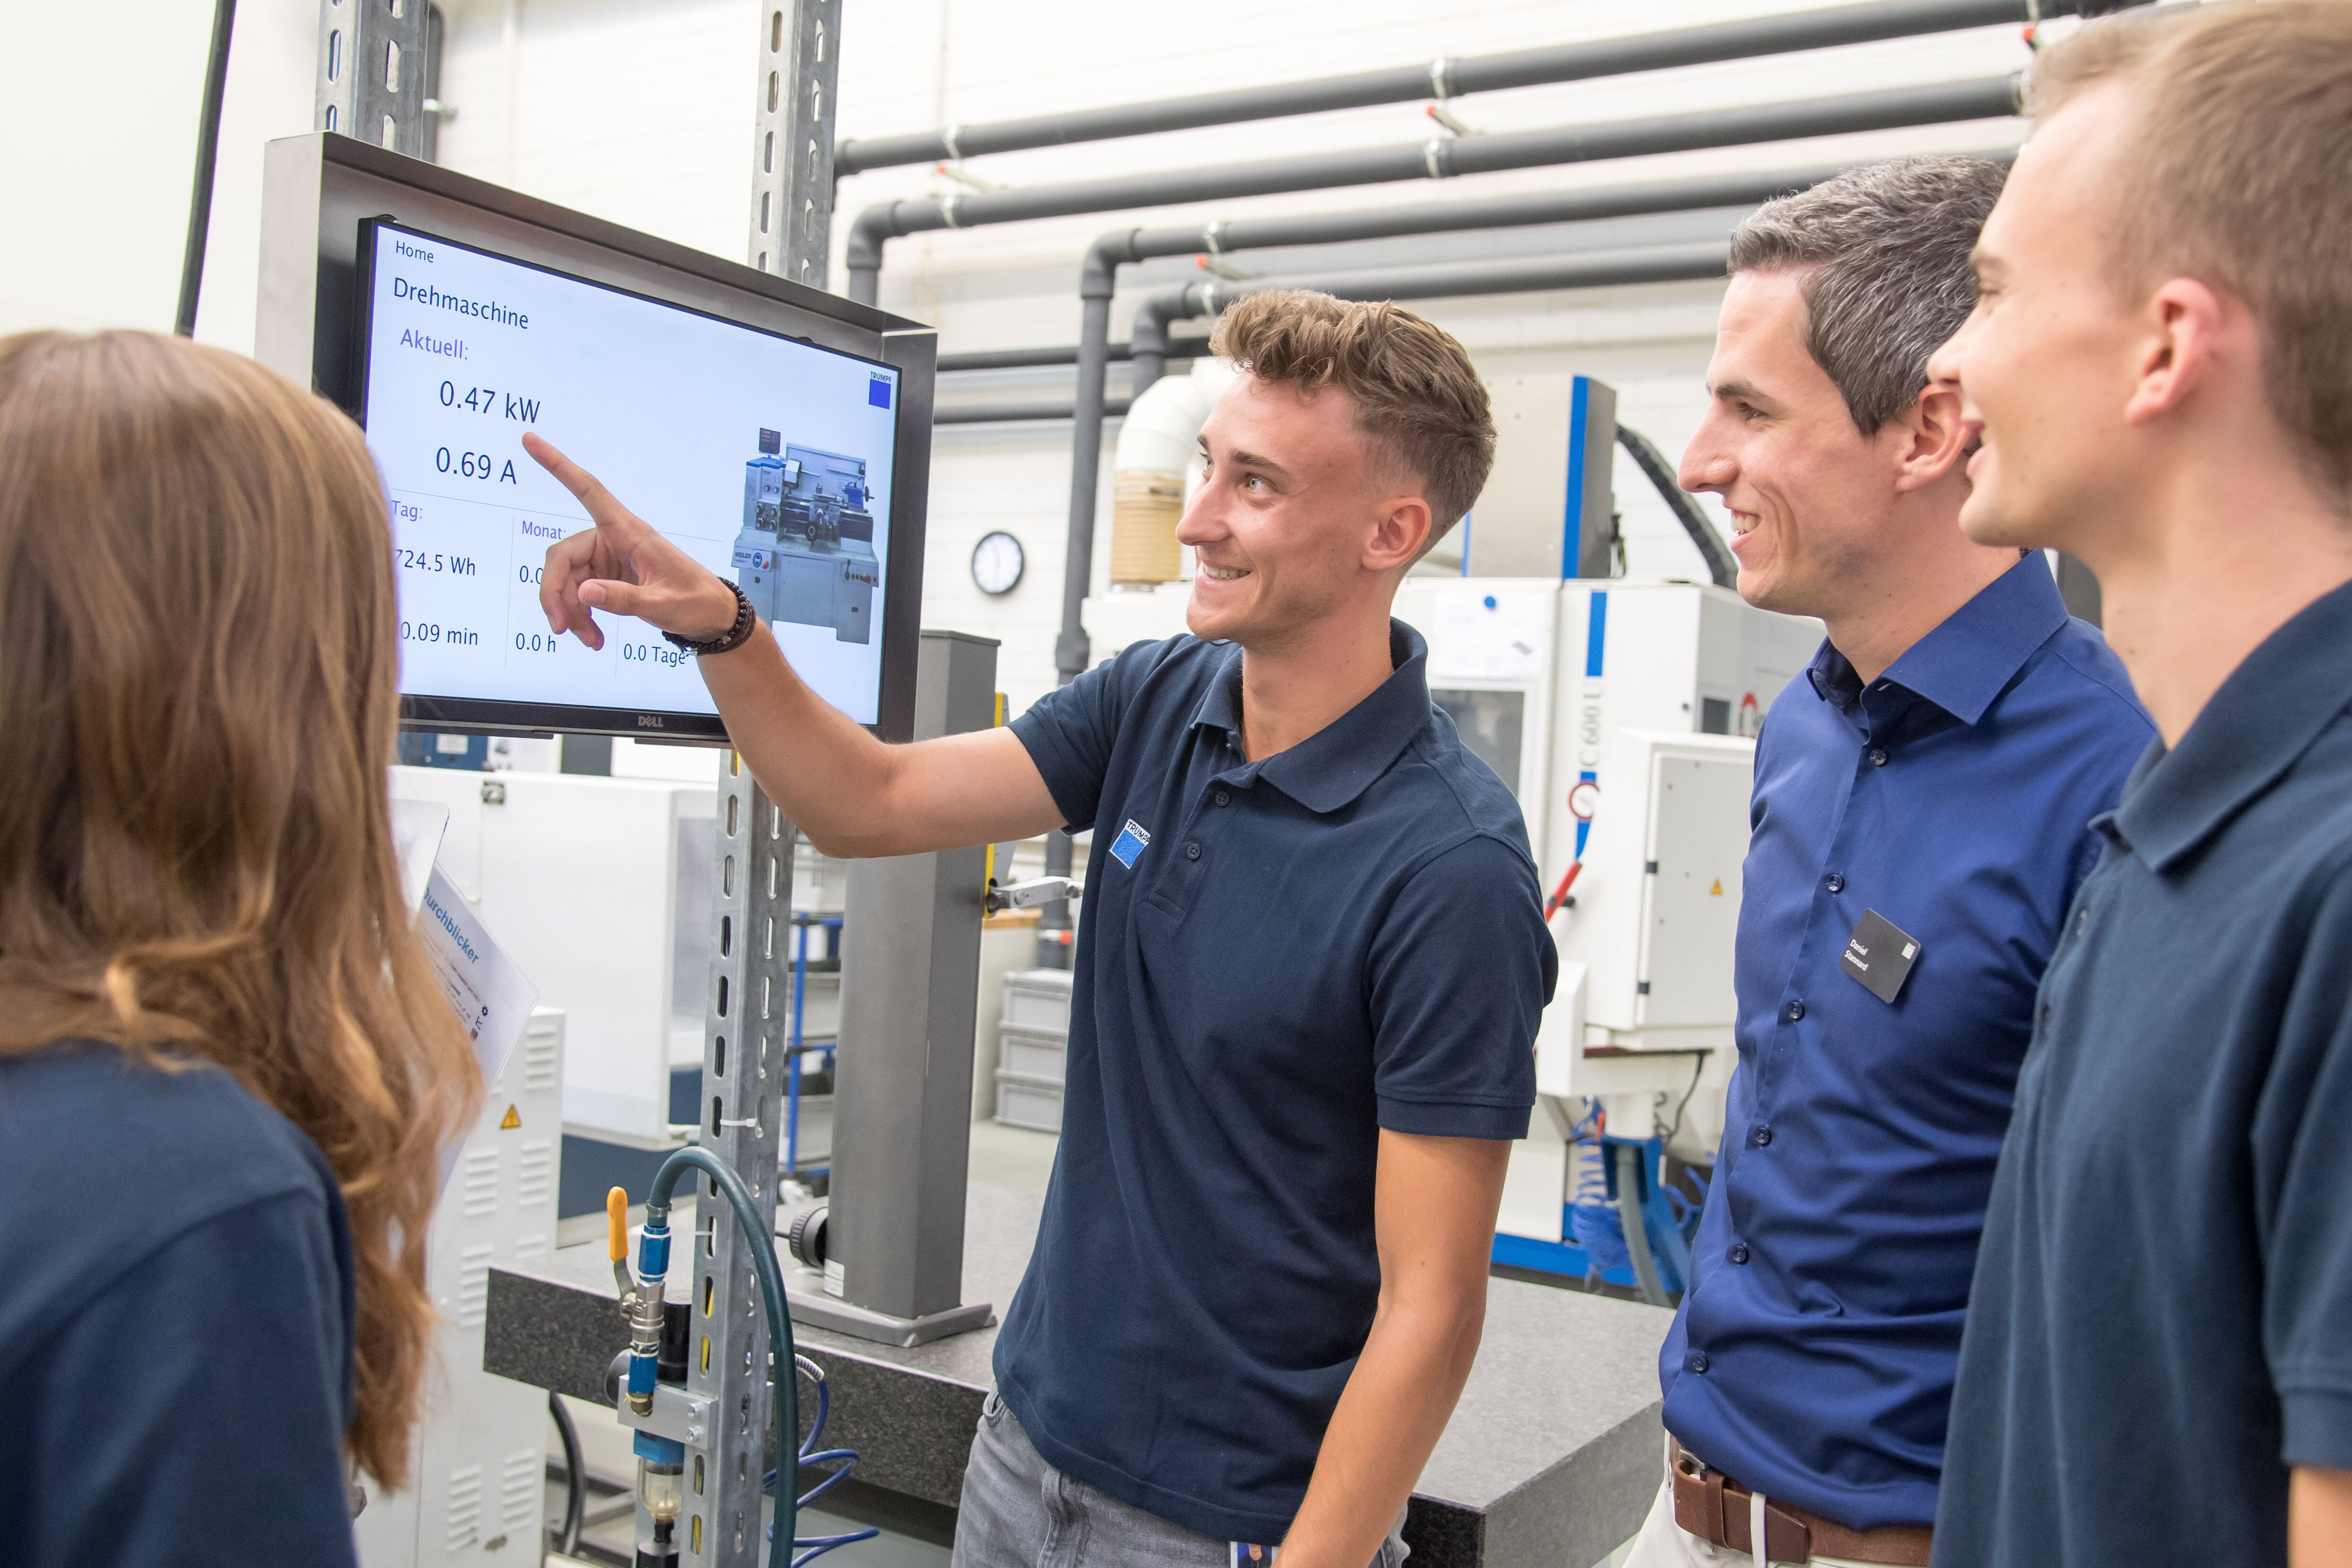 Apprentices and trainees learn how digital solutions improve production in the TRUMPF training centre. Photo: TRUMPF Group